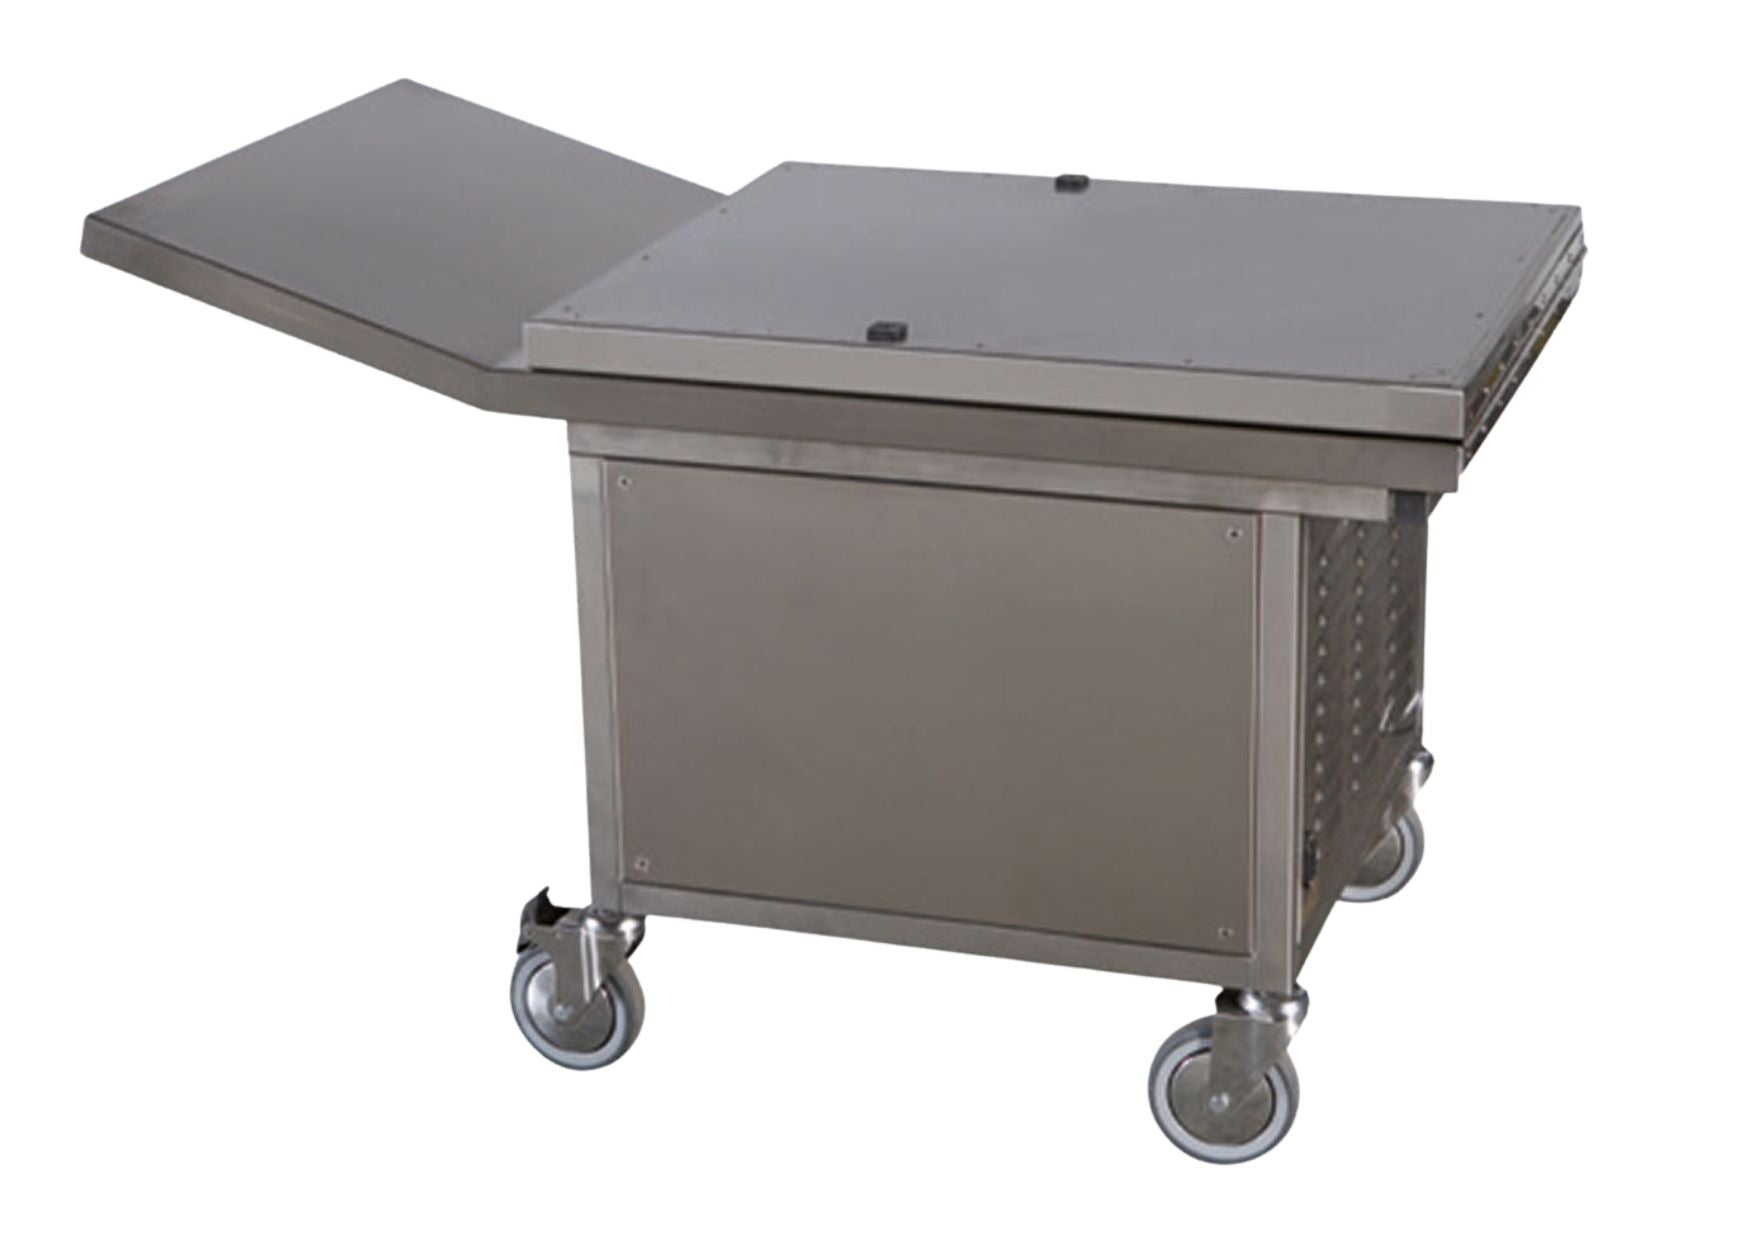 Stainless steel storage table with cooling